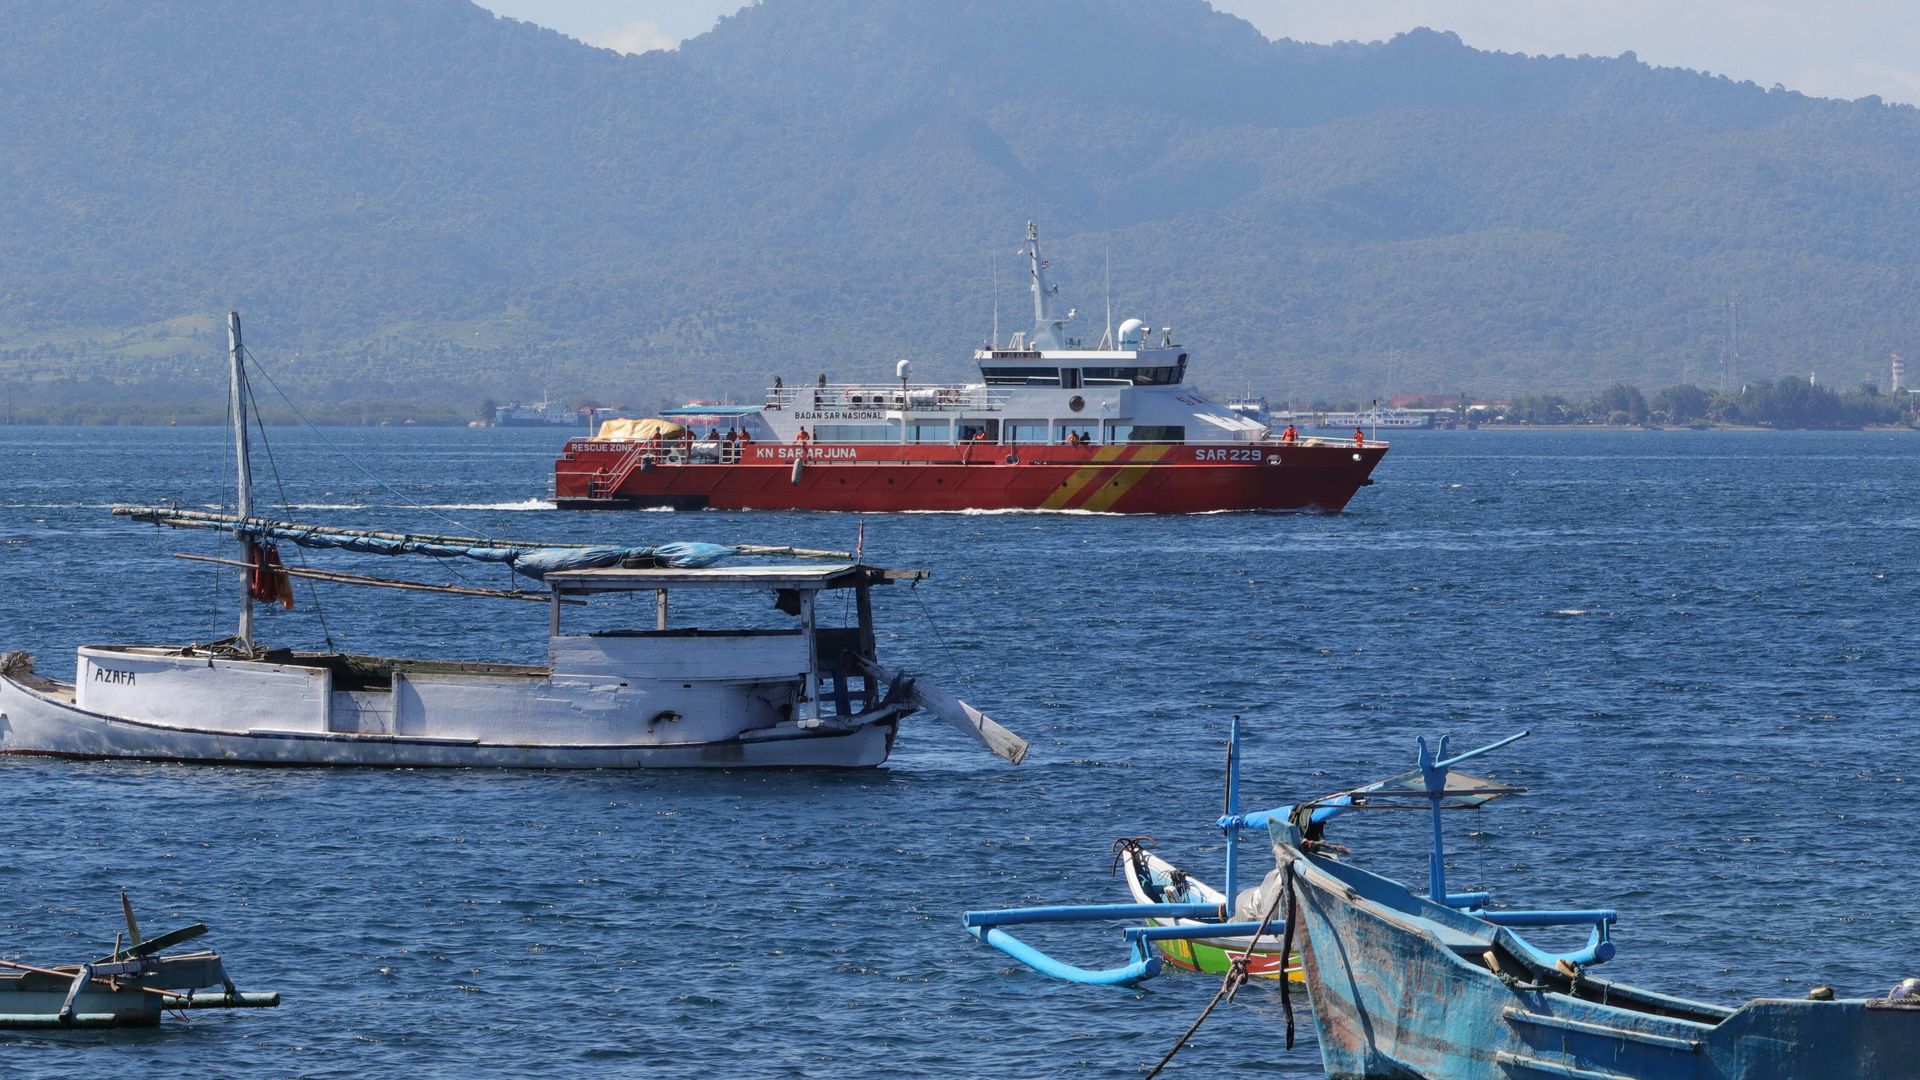 An Indonesian search and rescue vessel during a search operation for submarine KRI Nanggala 402 near Banyuwangi on April 23.